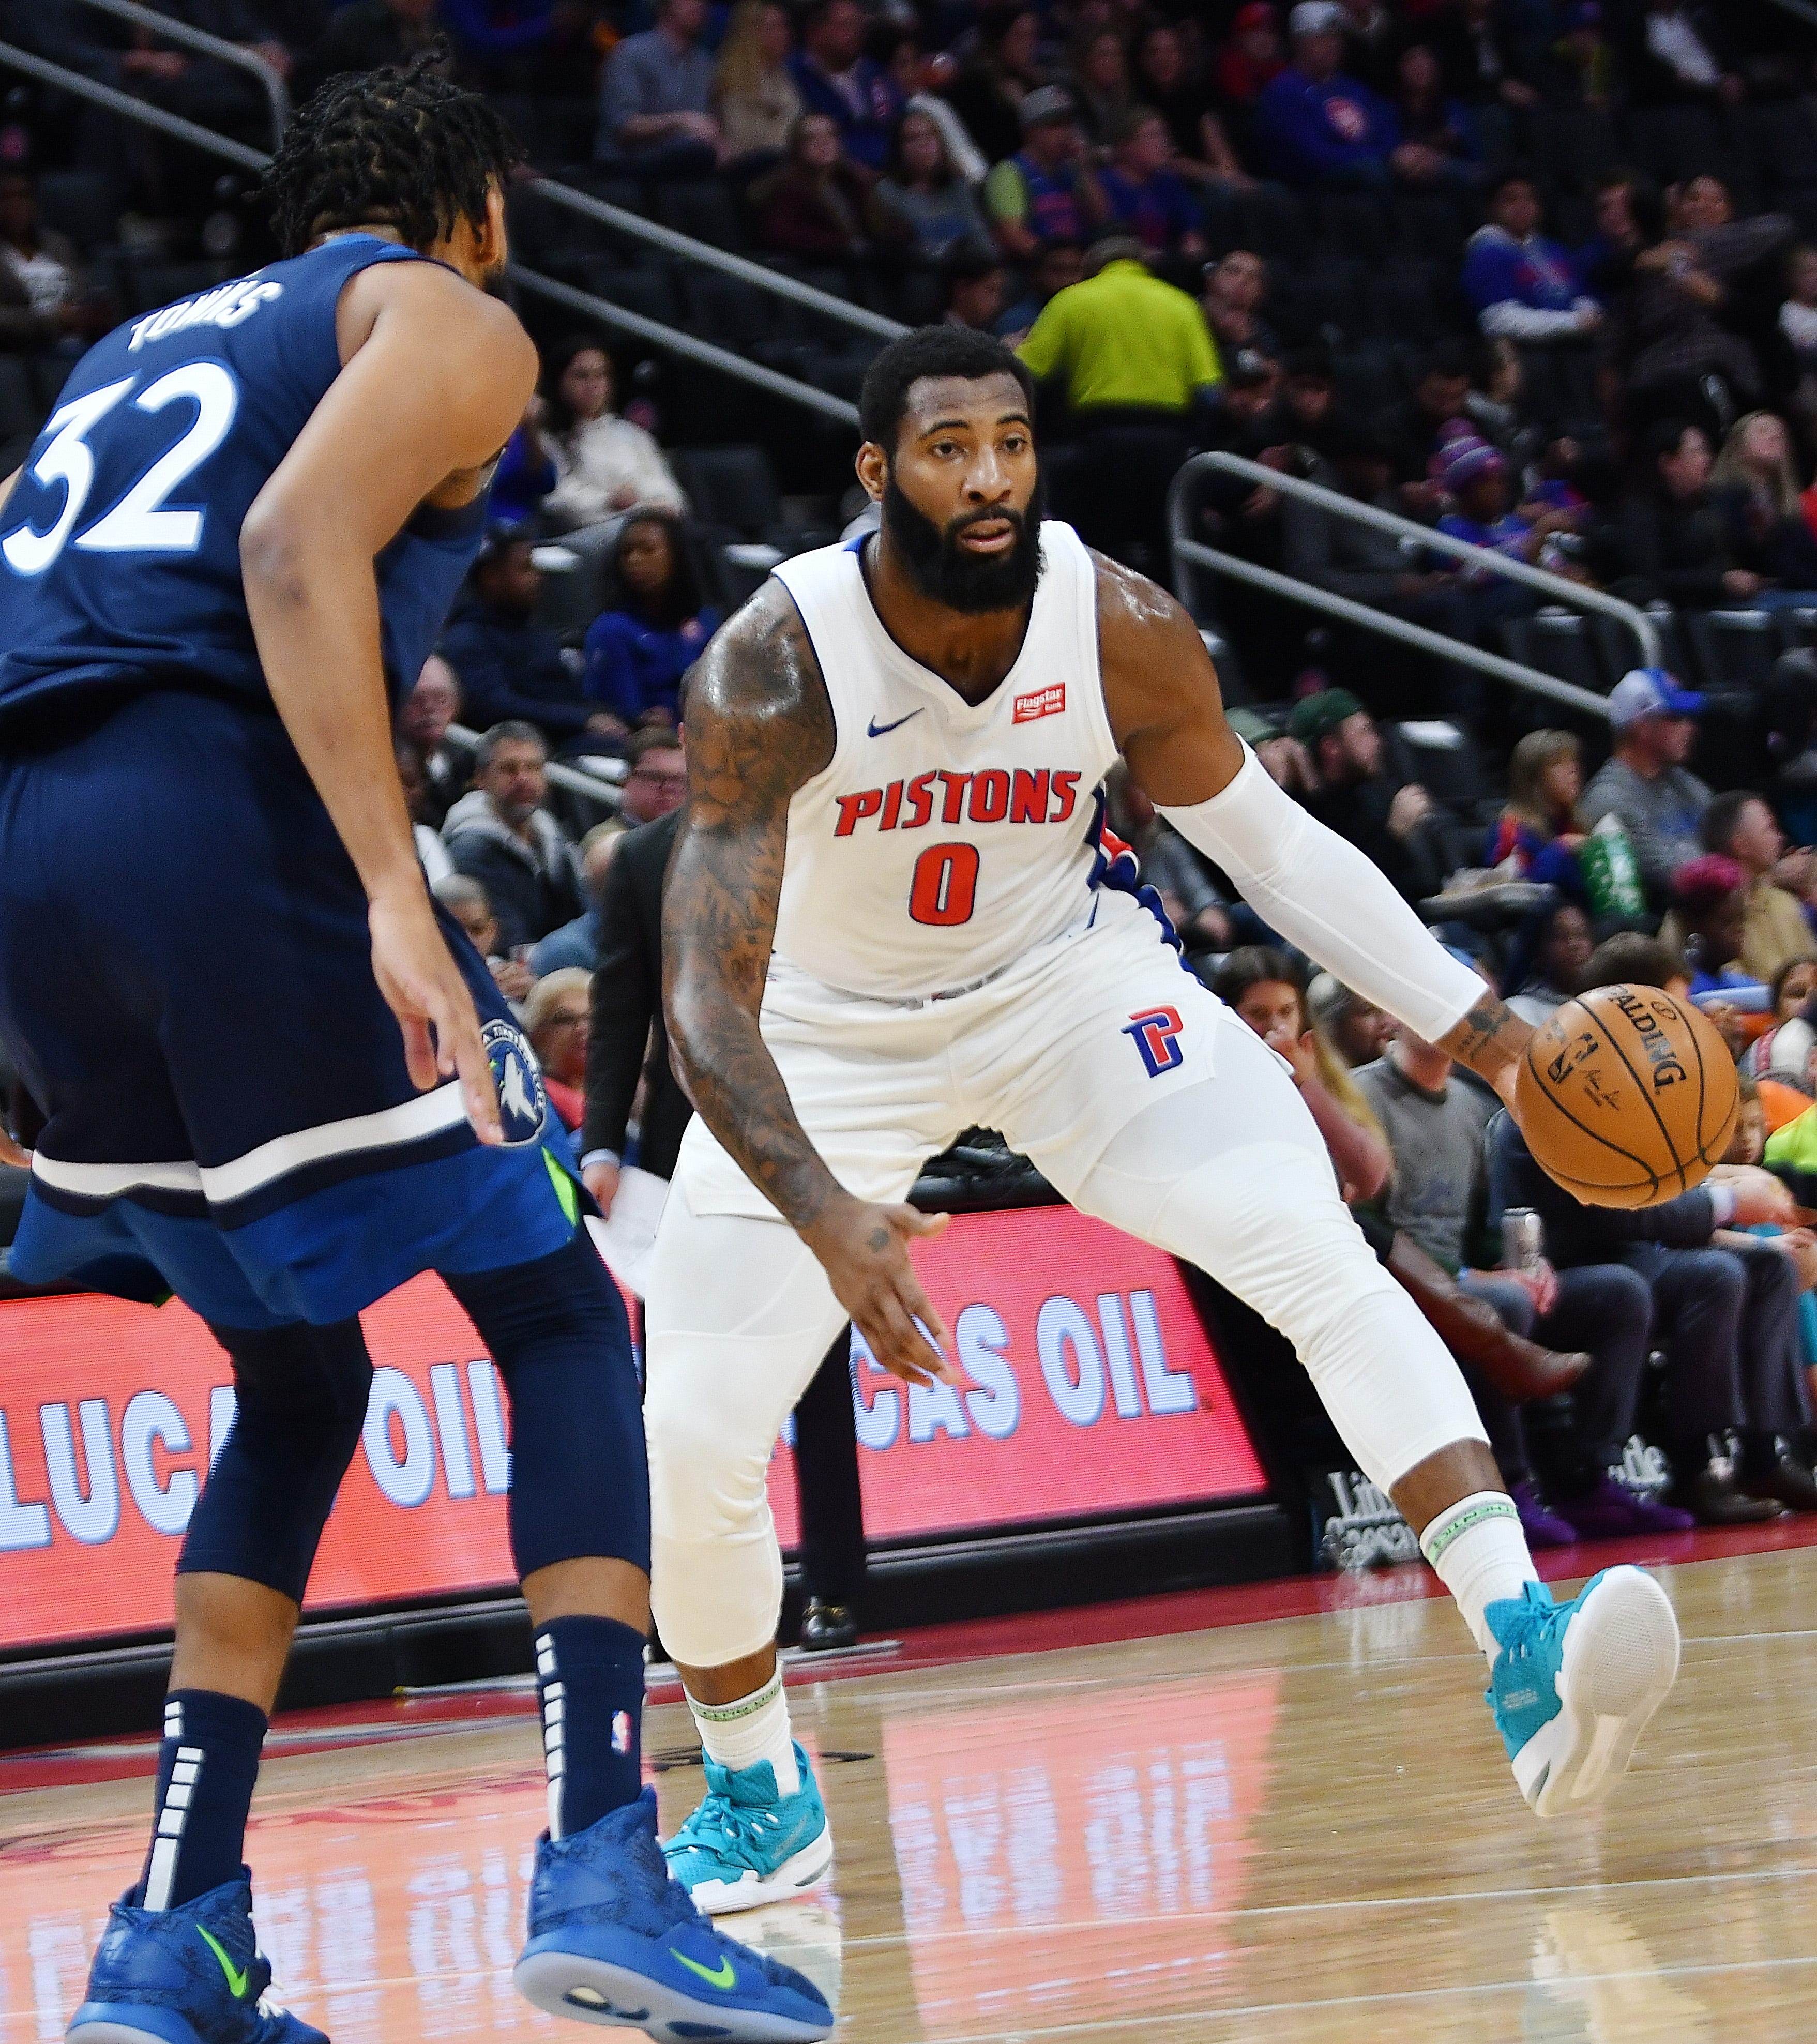 Pistons' Andre Drummond looks for room around Timberwolves' Karl-Anthony Towns in the first quarter.